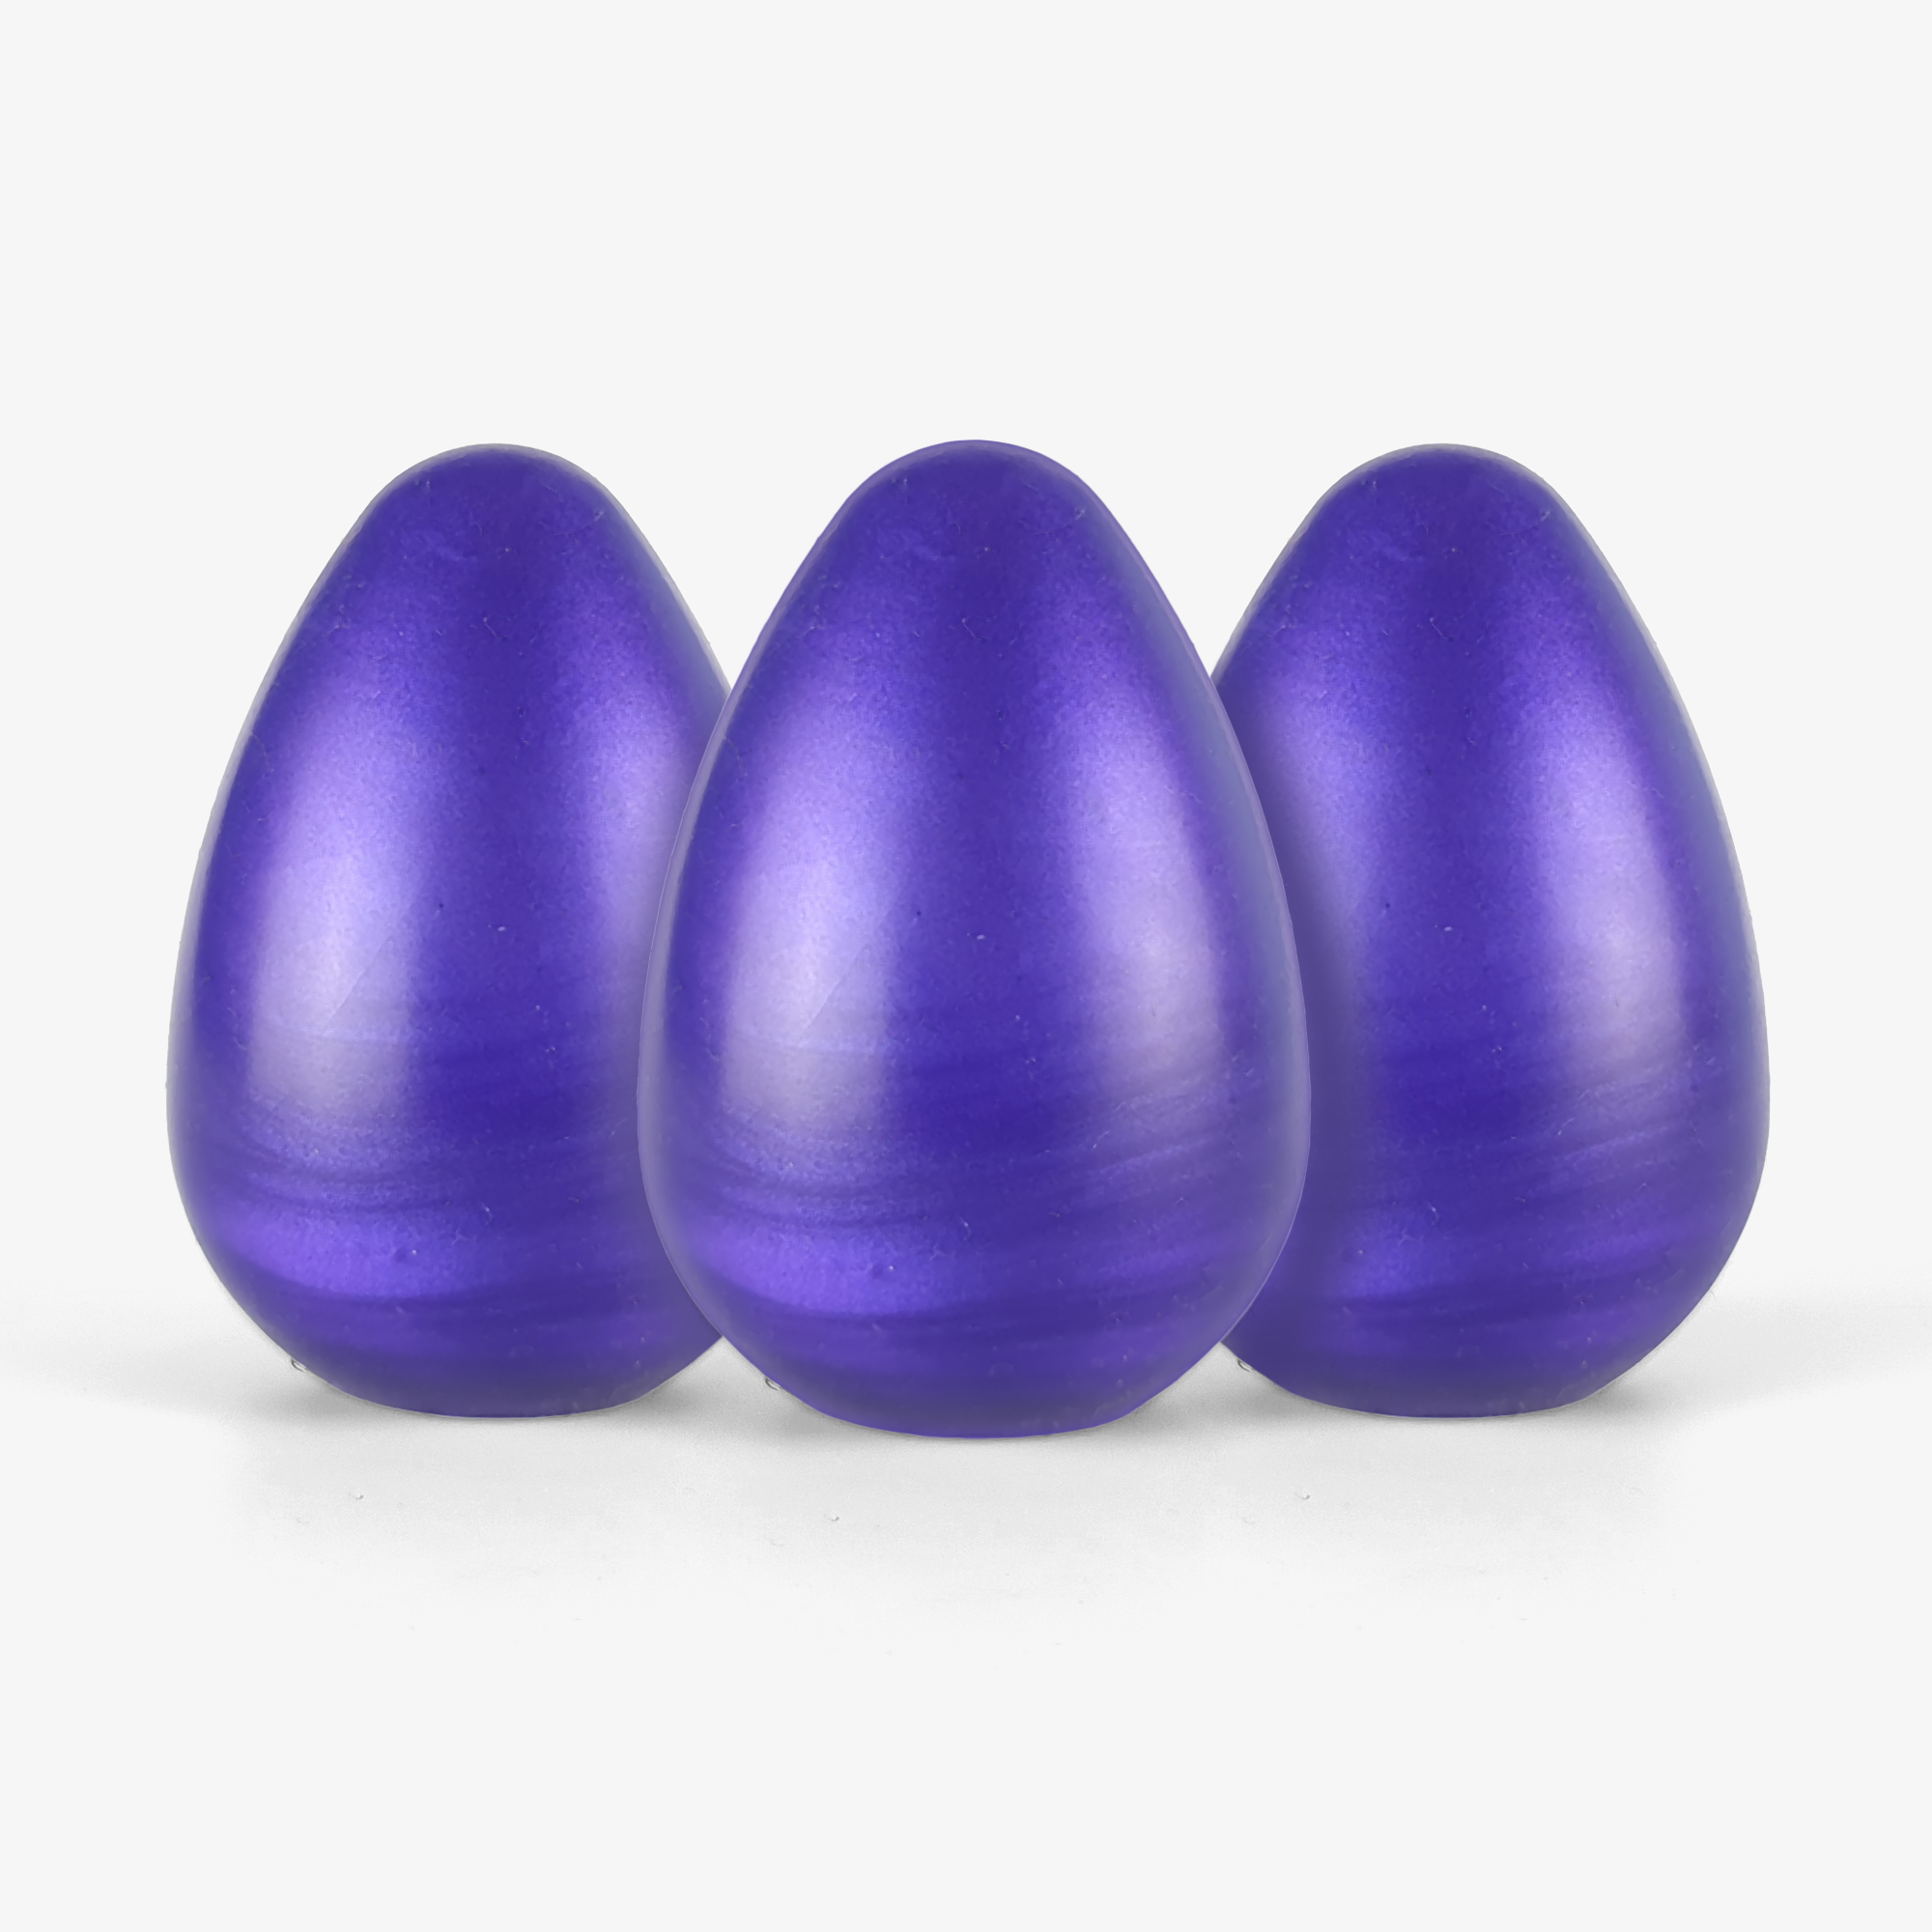 The Egg (Set of 3)